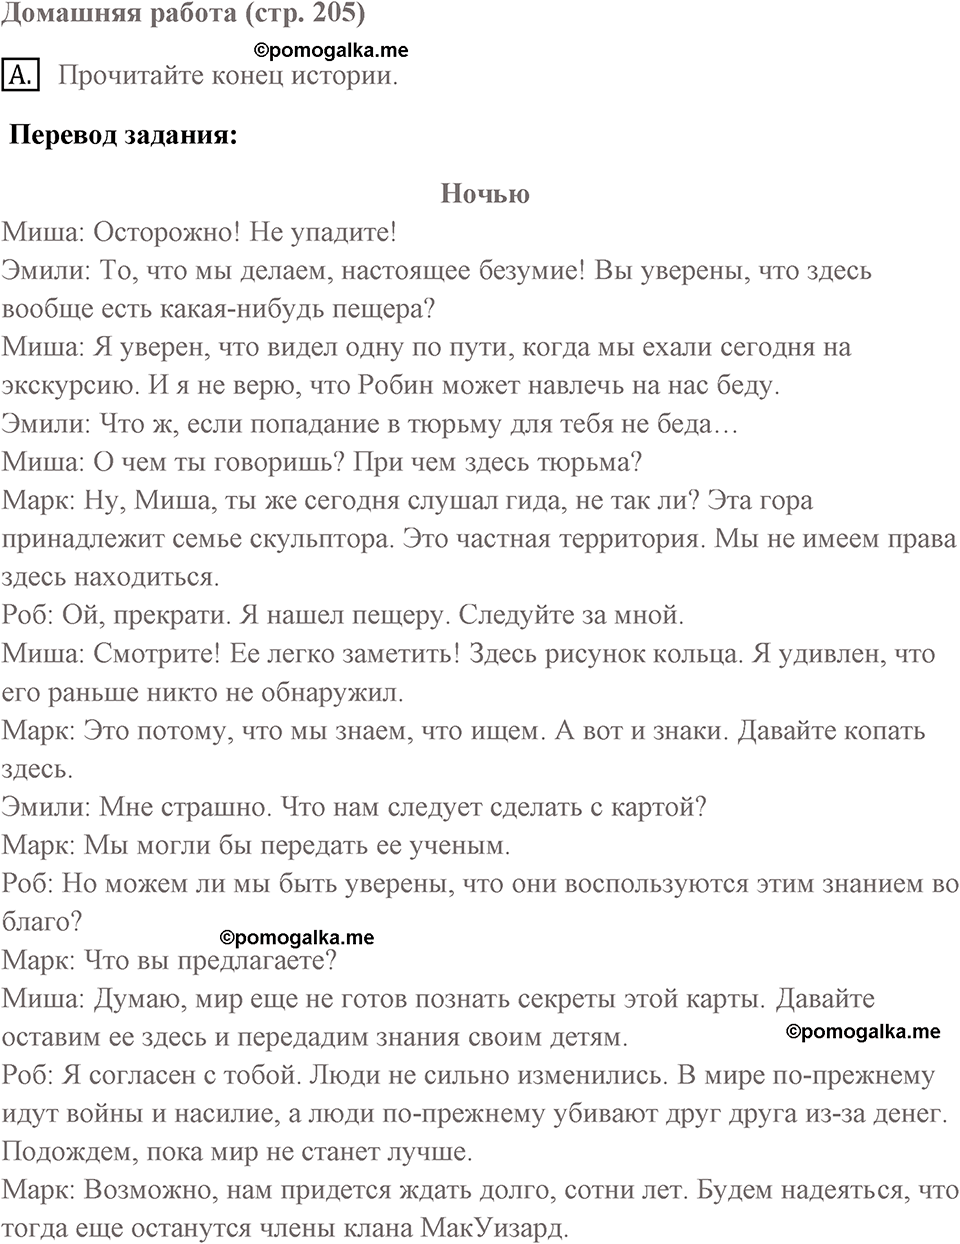 Unit 6 lesson 9 exercise №a английский язык 9 класс Happy English.ru